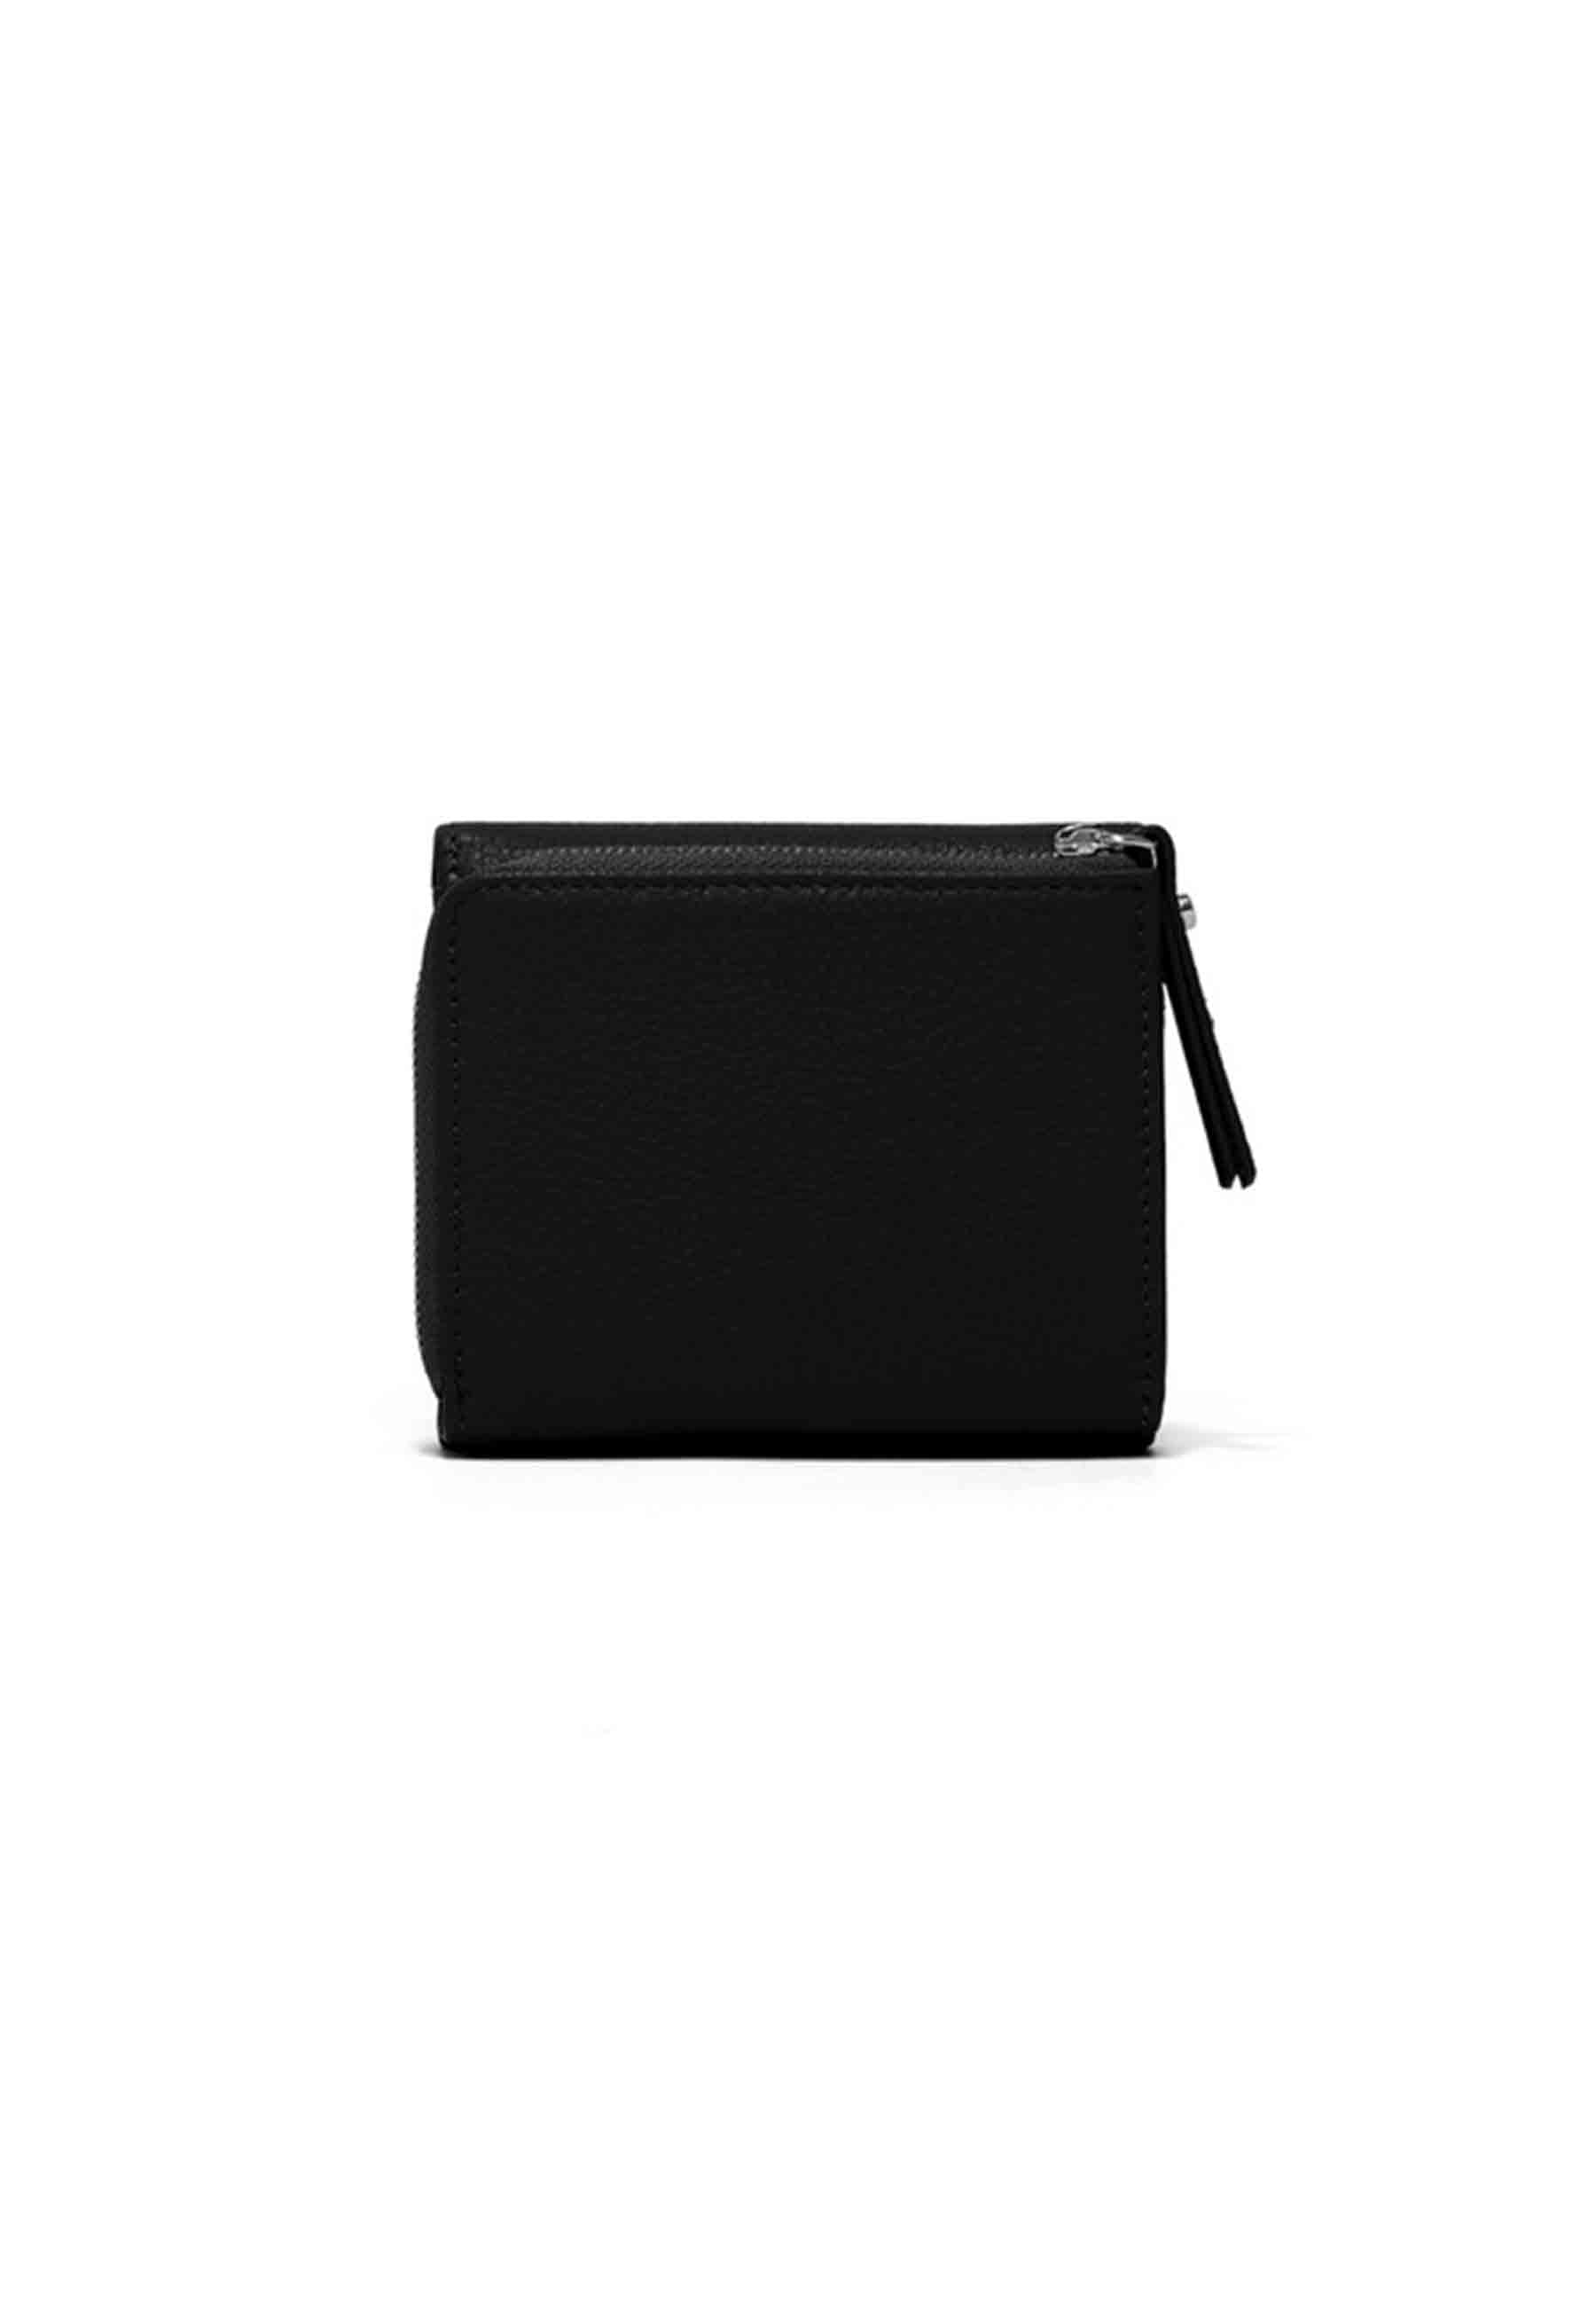 Compact women's wallet in black leather with coin purse